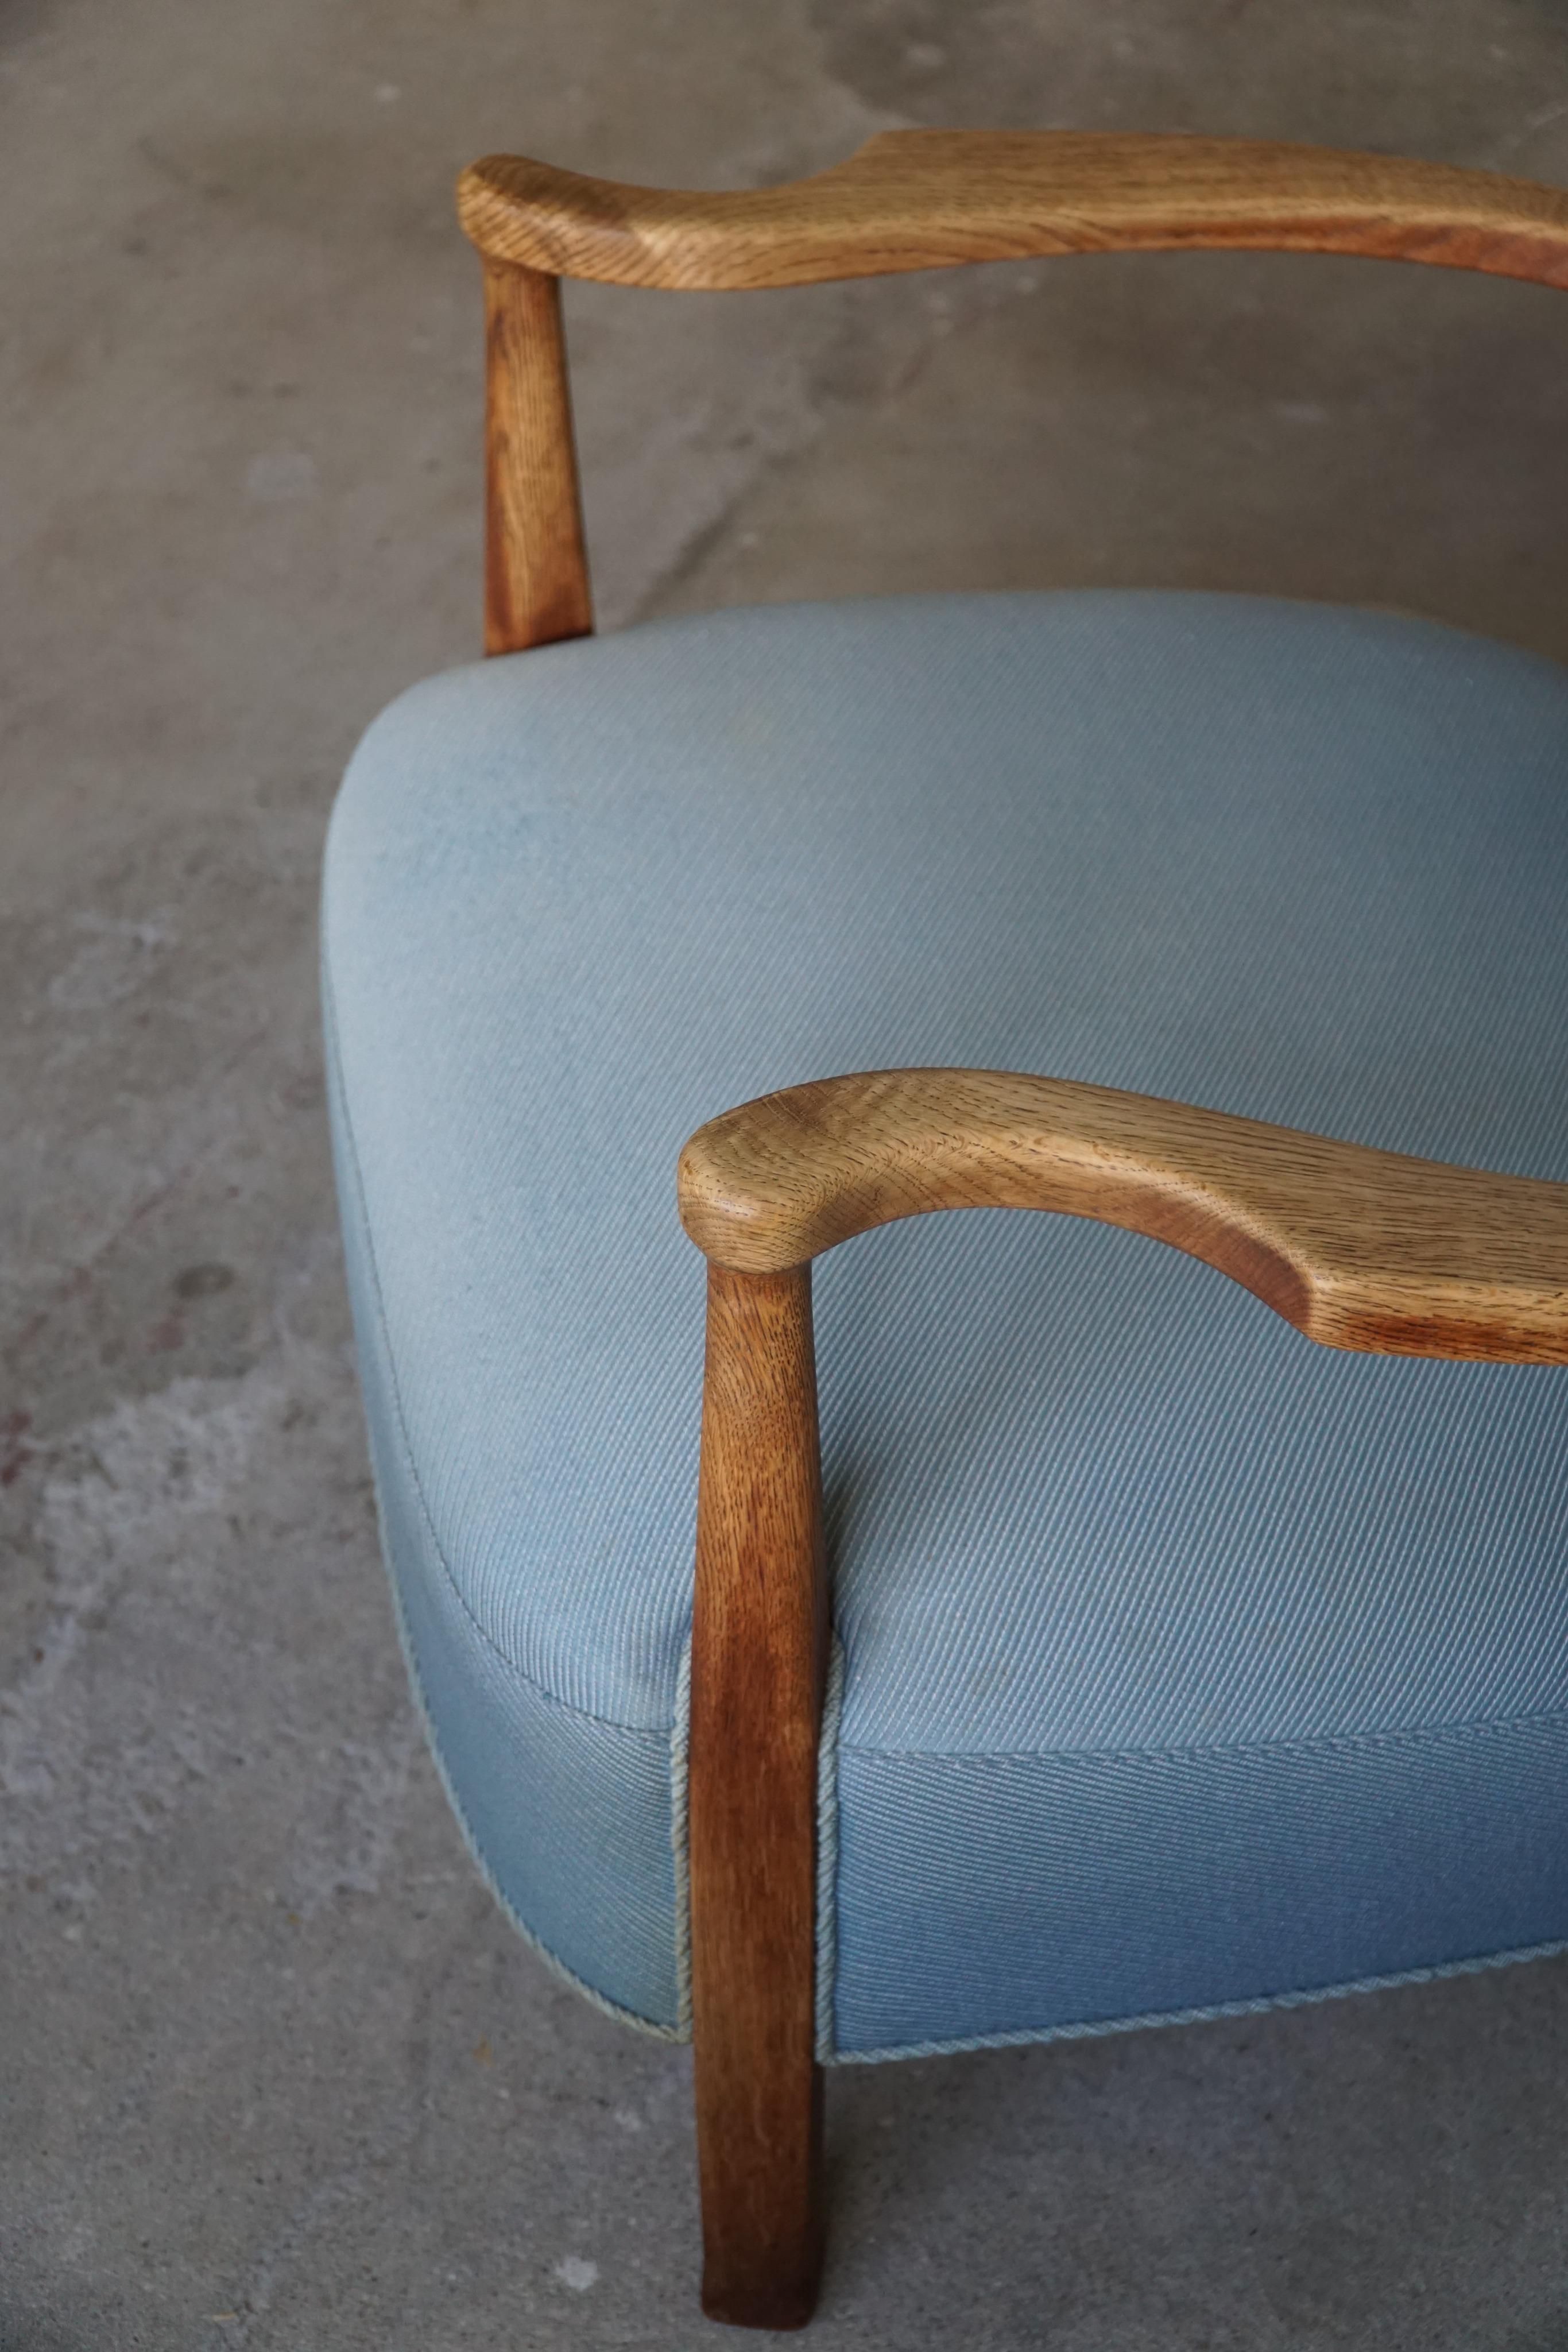 Danish Modern, Curved Lounge Chair in Oak, Attributed to Viggo Boesen, 1950s For Sale 3